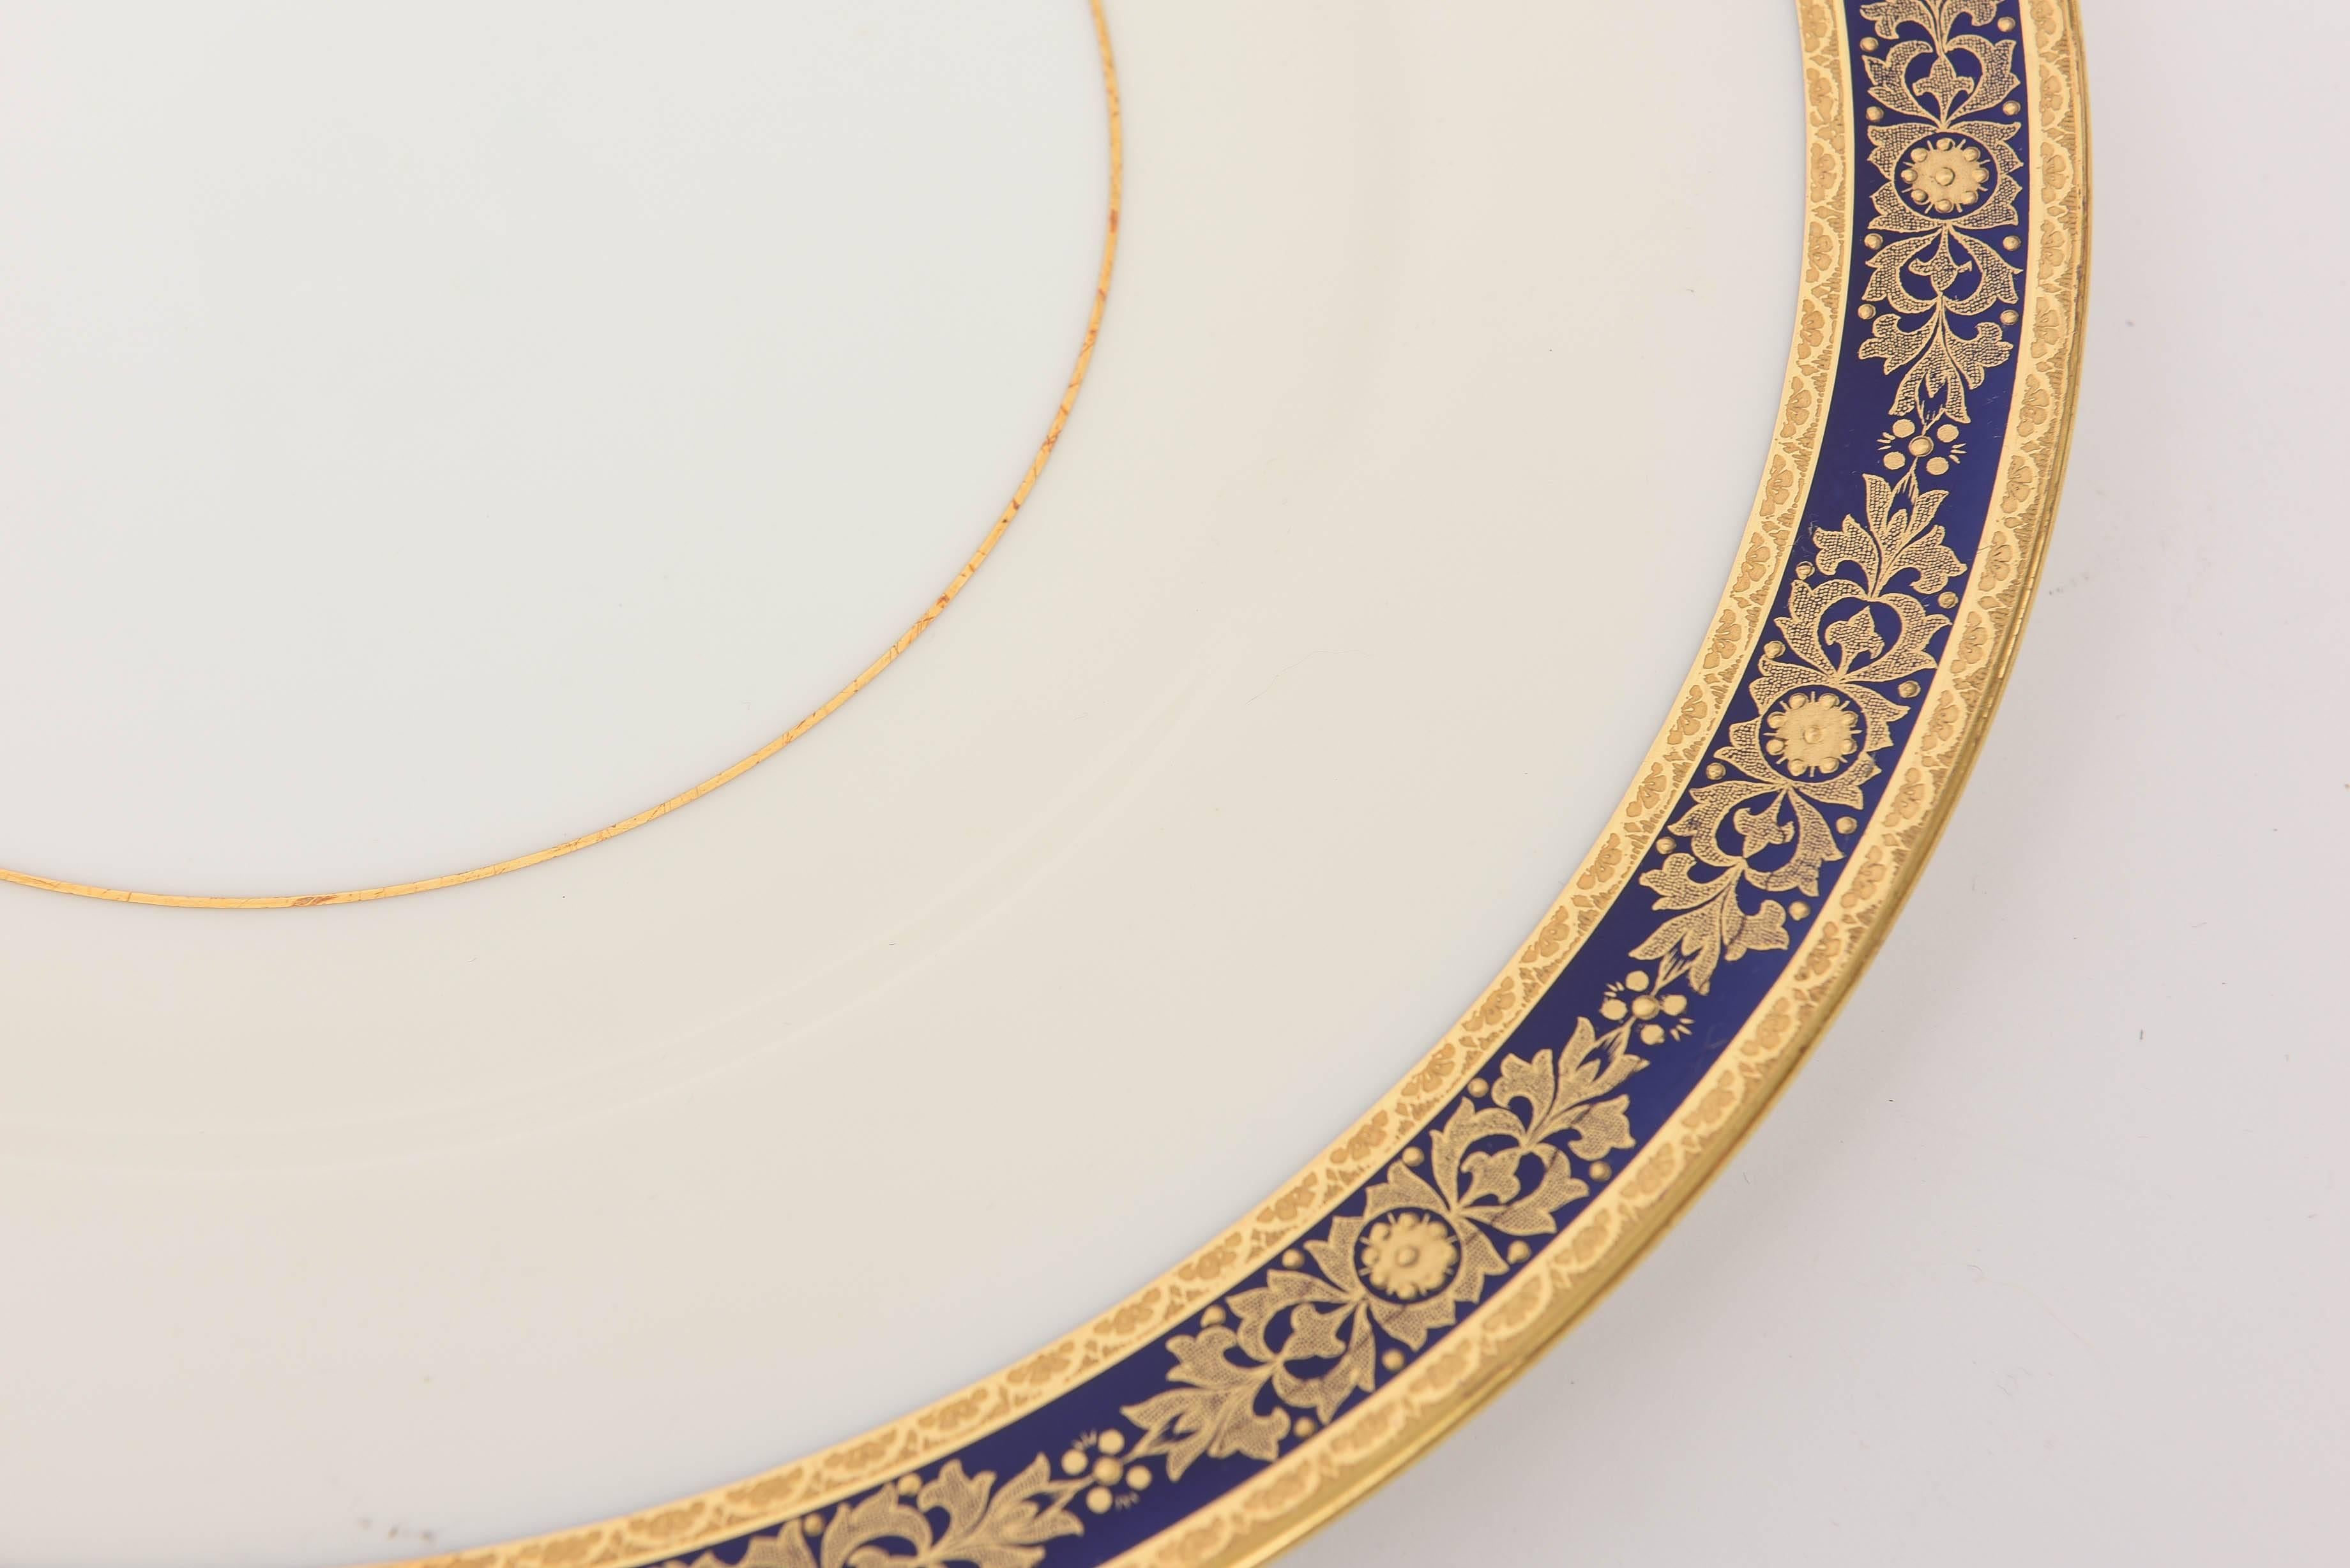 Hand-Crafted 12 Cobalt Blue and Raised Gilt Dinner Plates, Minton, England for Tiffany